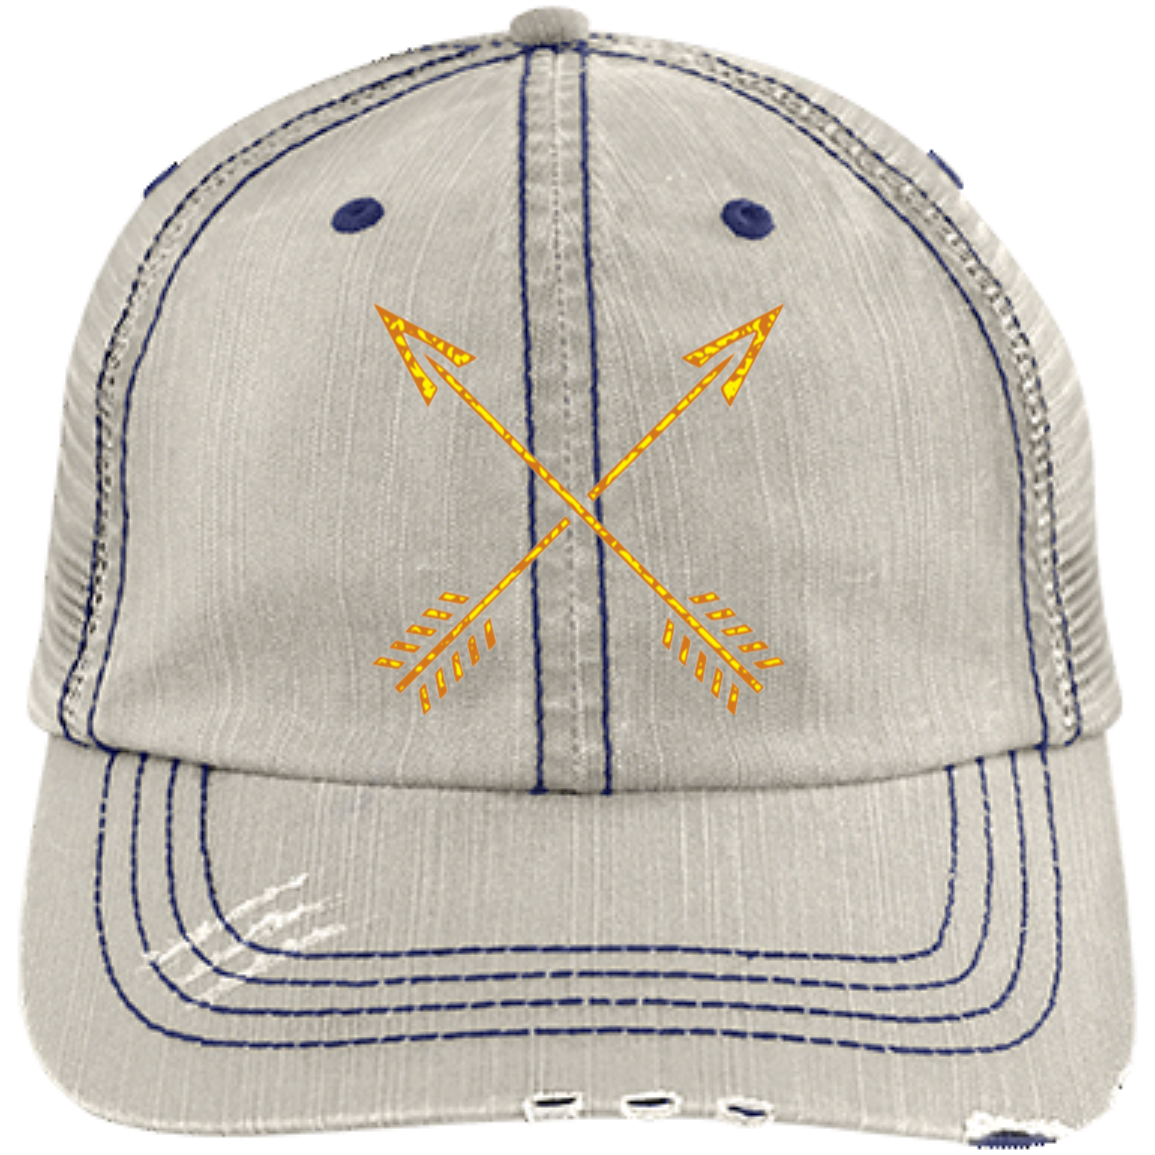 Buffalo Soldiers-Unstructured Trucker Cap